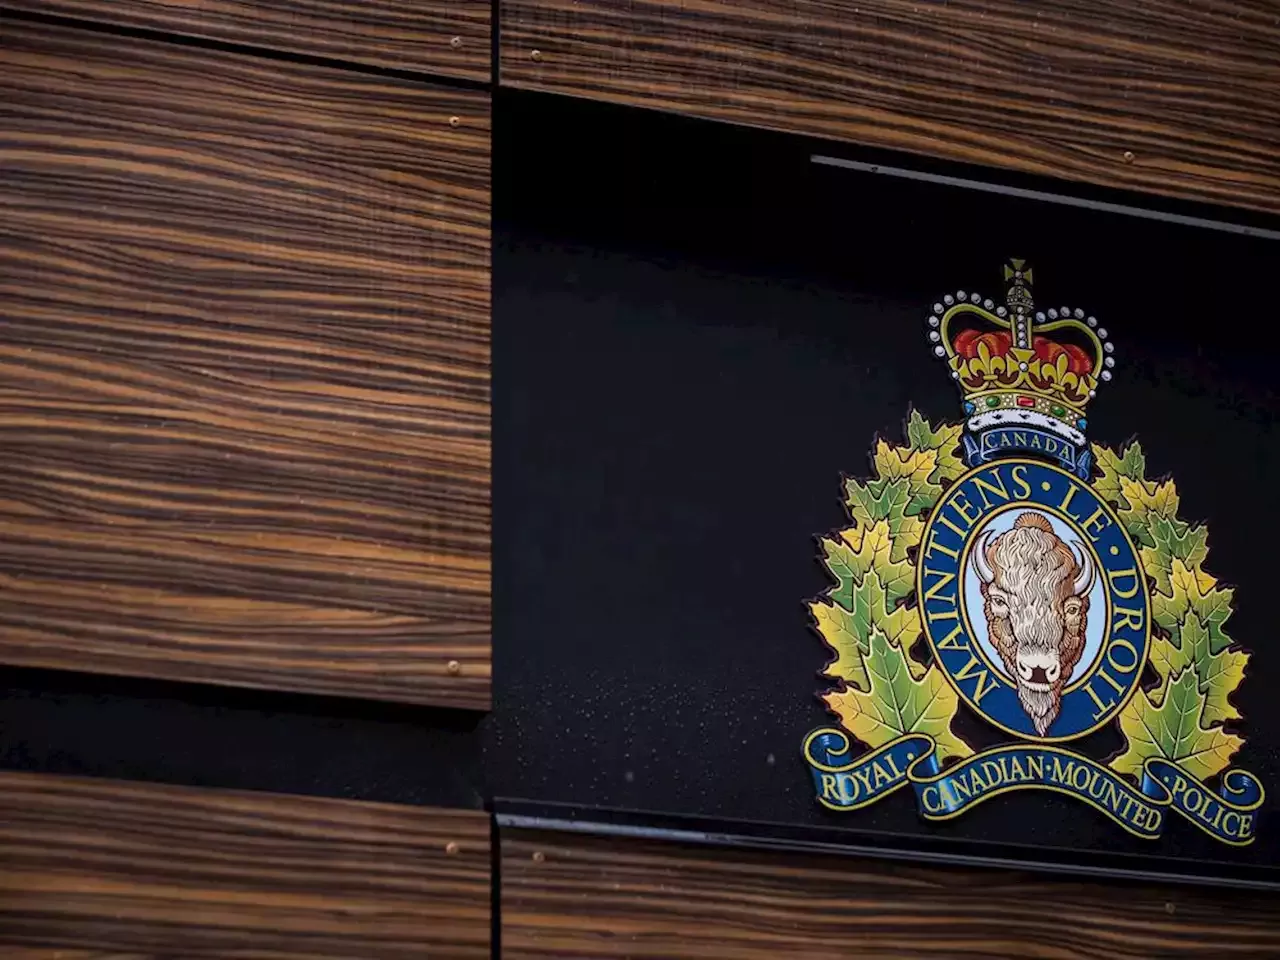 Police-involved shooting in Barriere leaves one man injured: B.C. RCMP